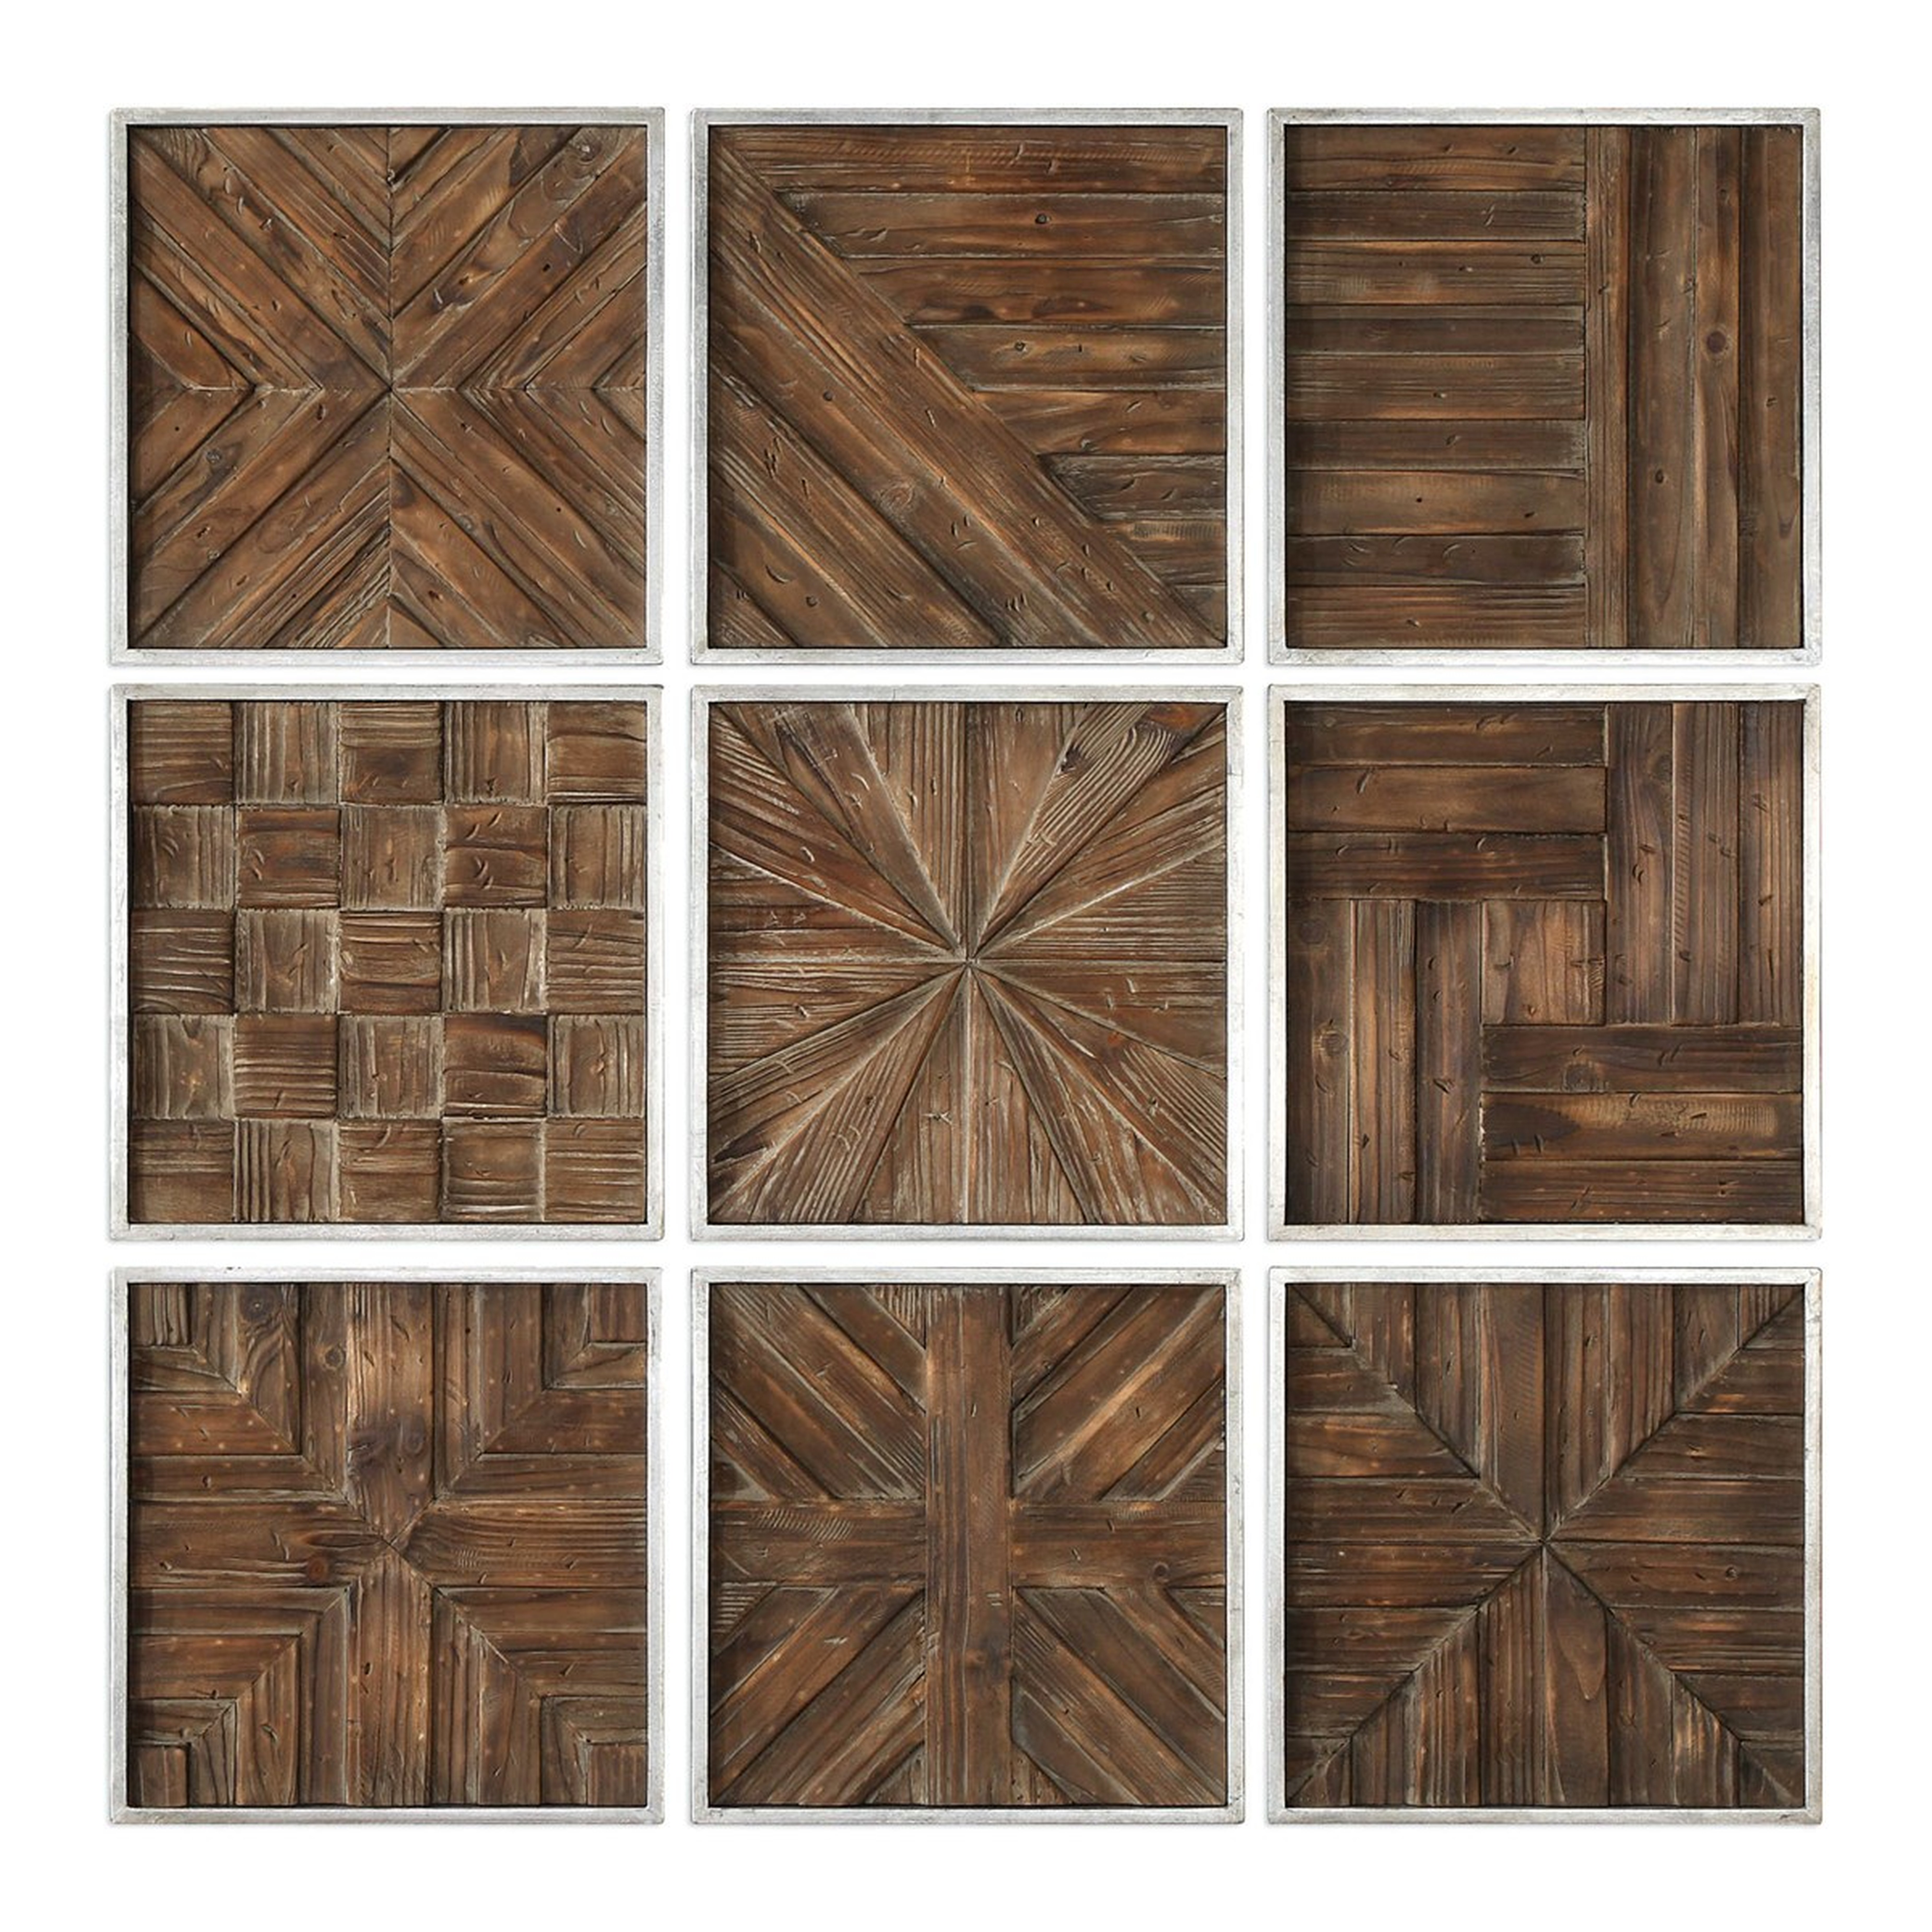 Bryndle Rustic Wooden Squares, Set of 9 - Hudsonhill Foundry